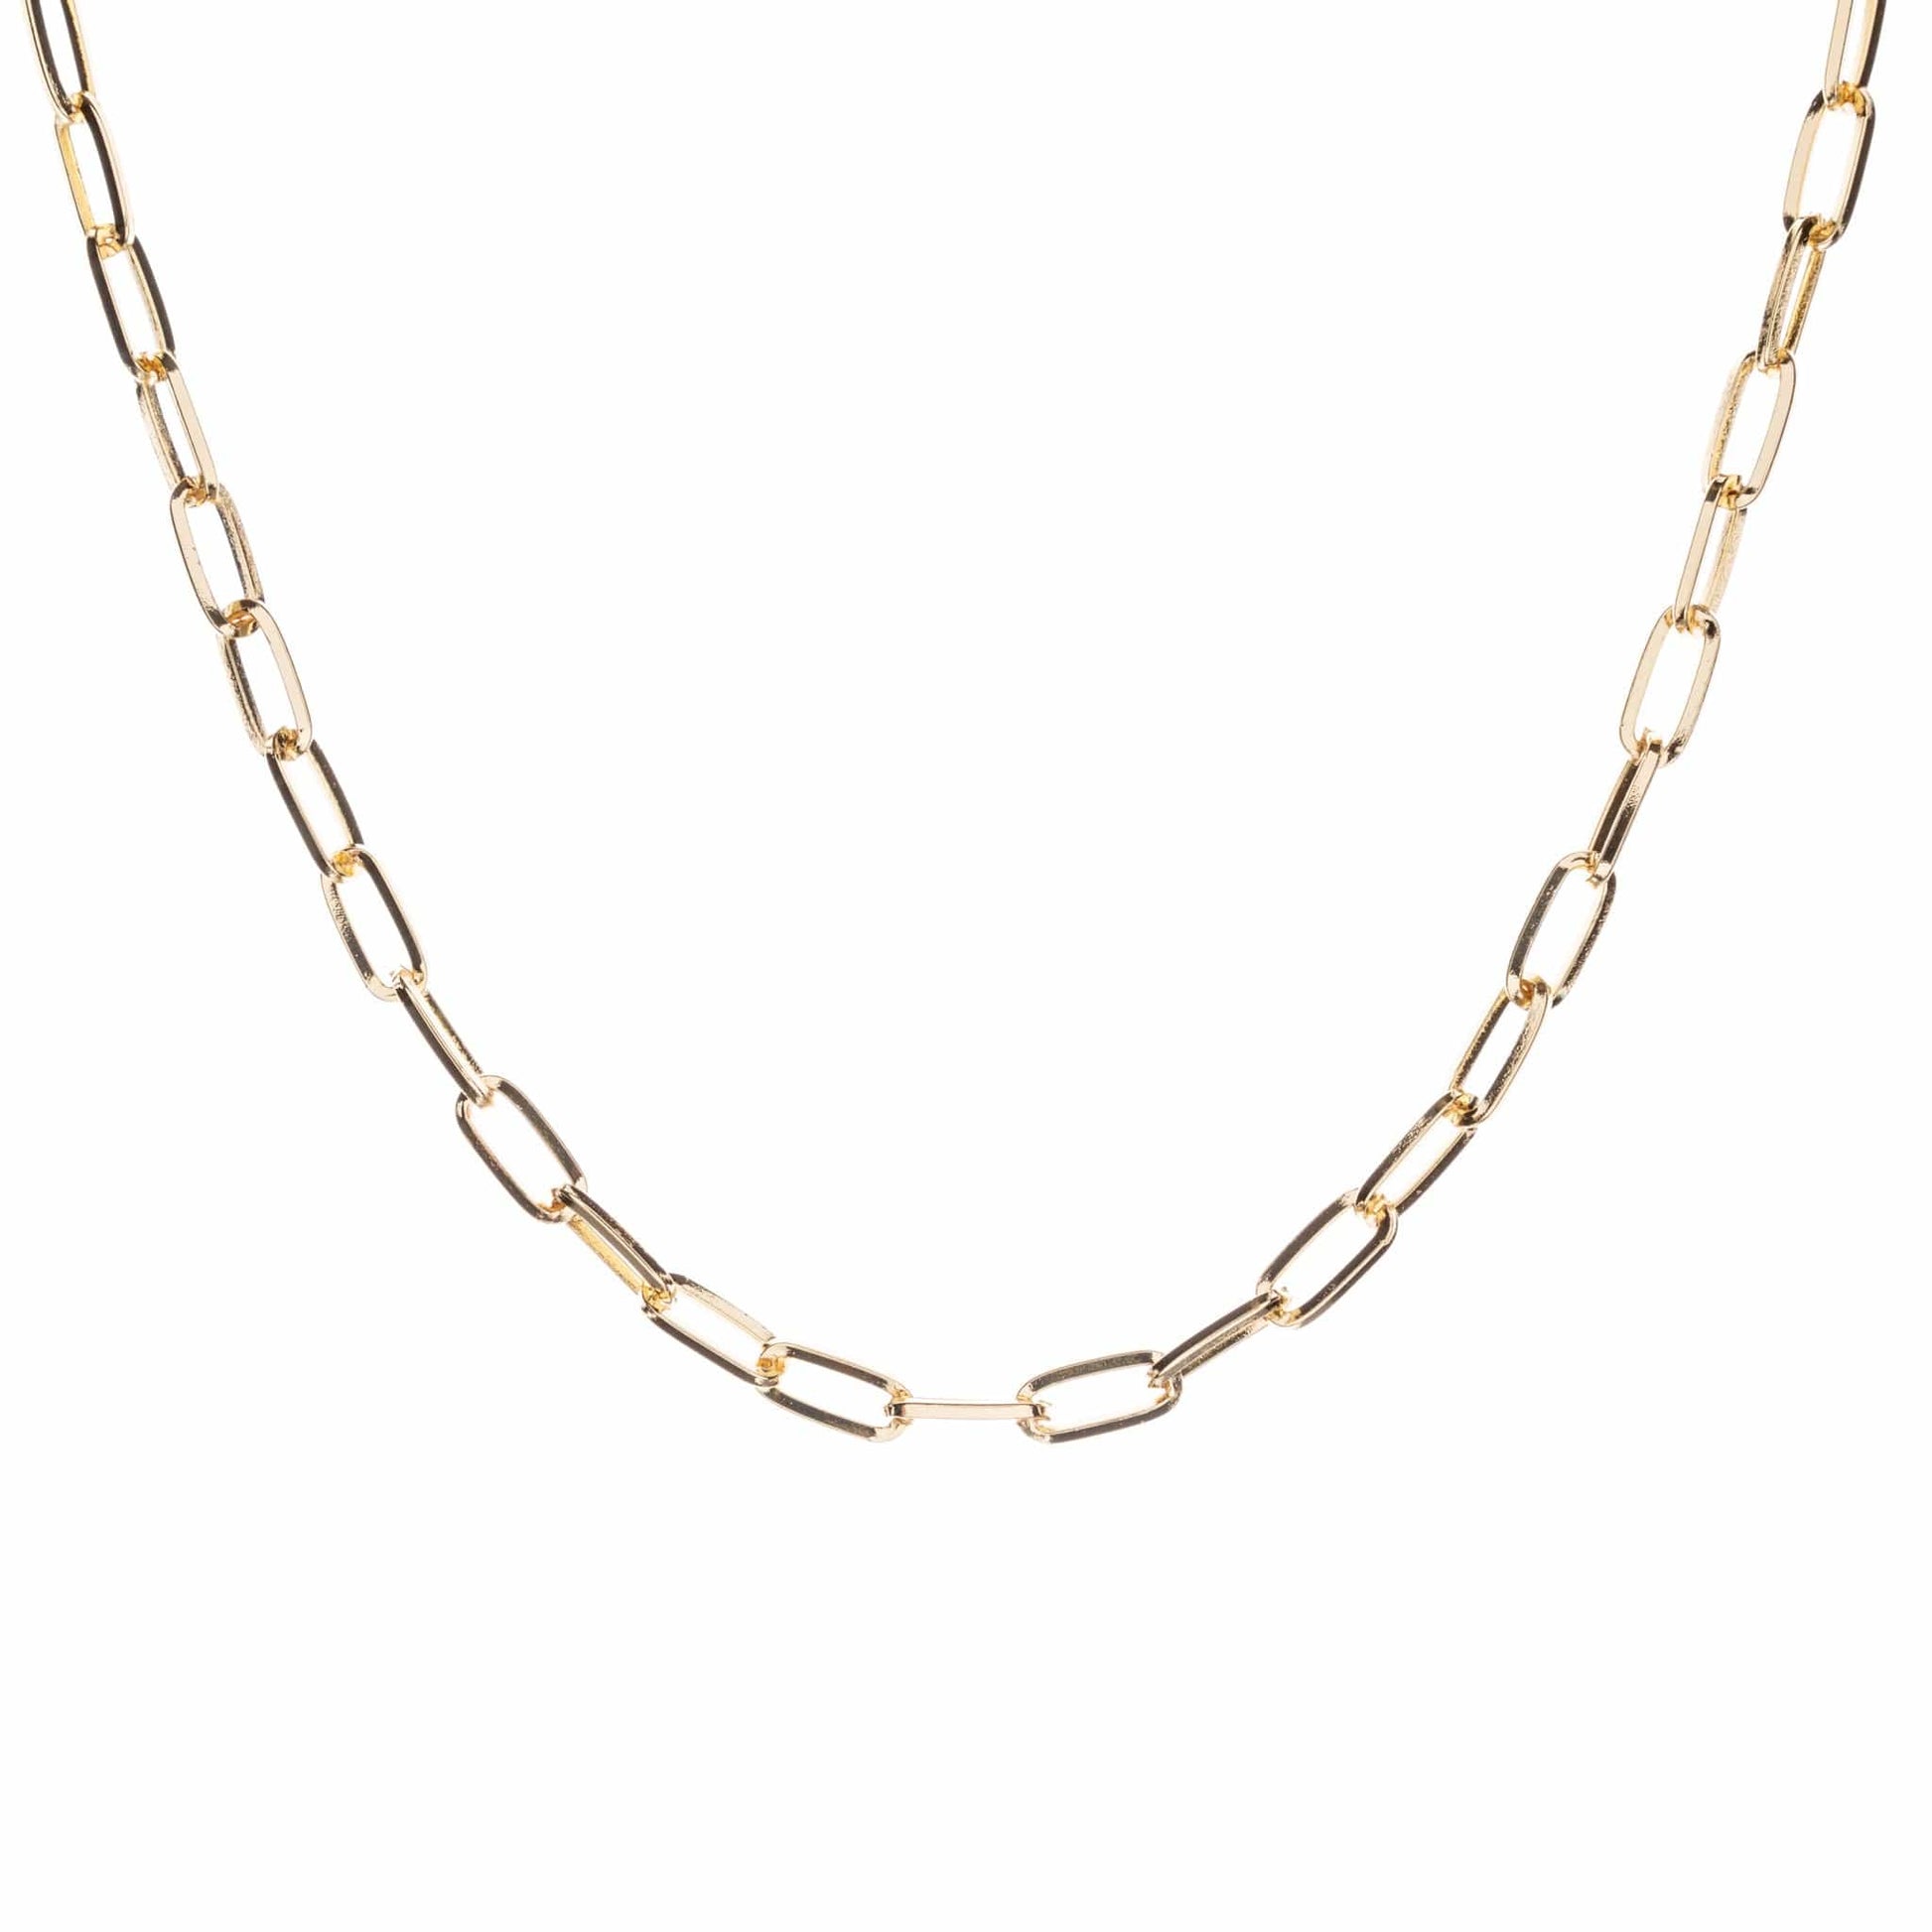 Paperclip link necklace in gold